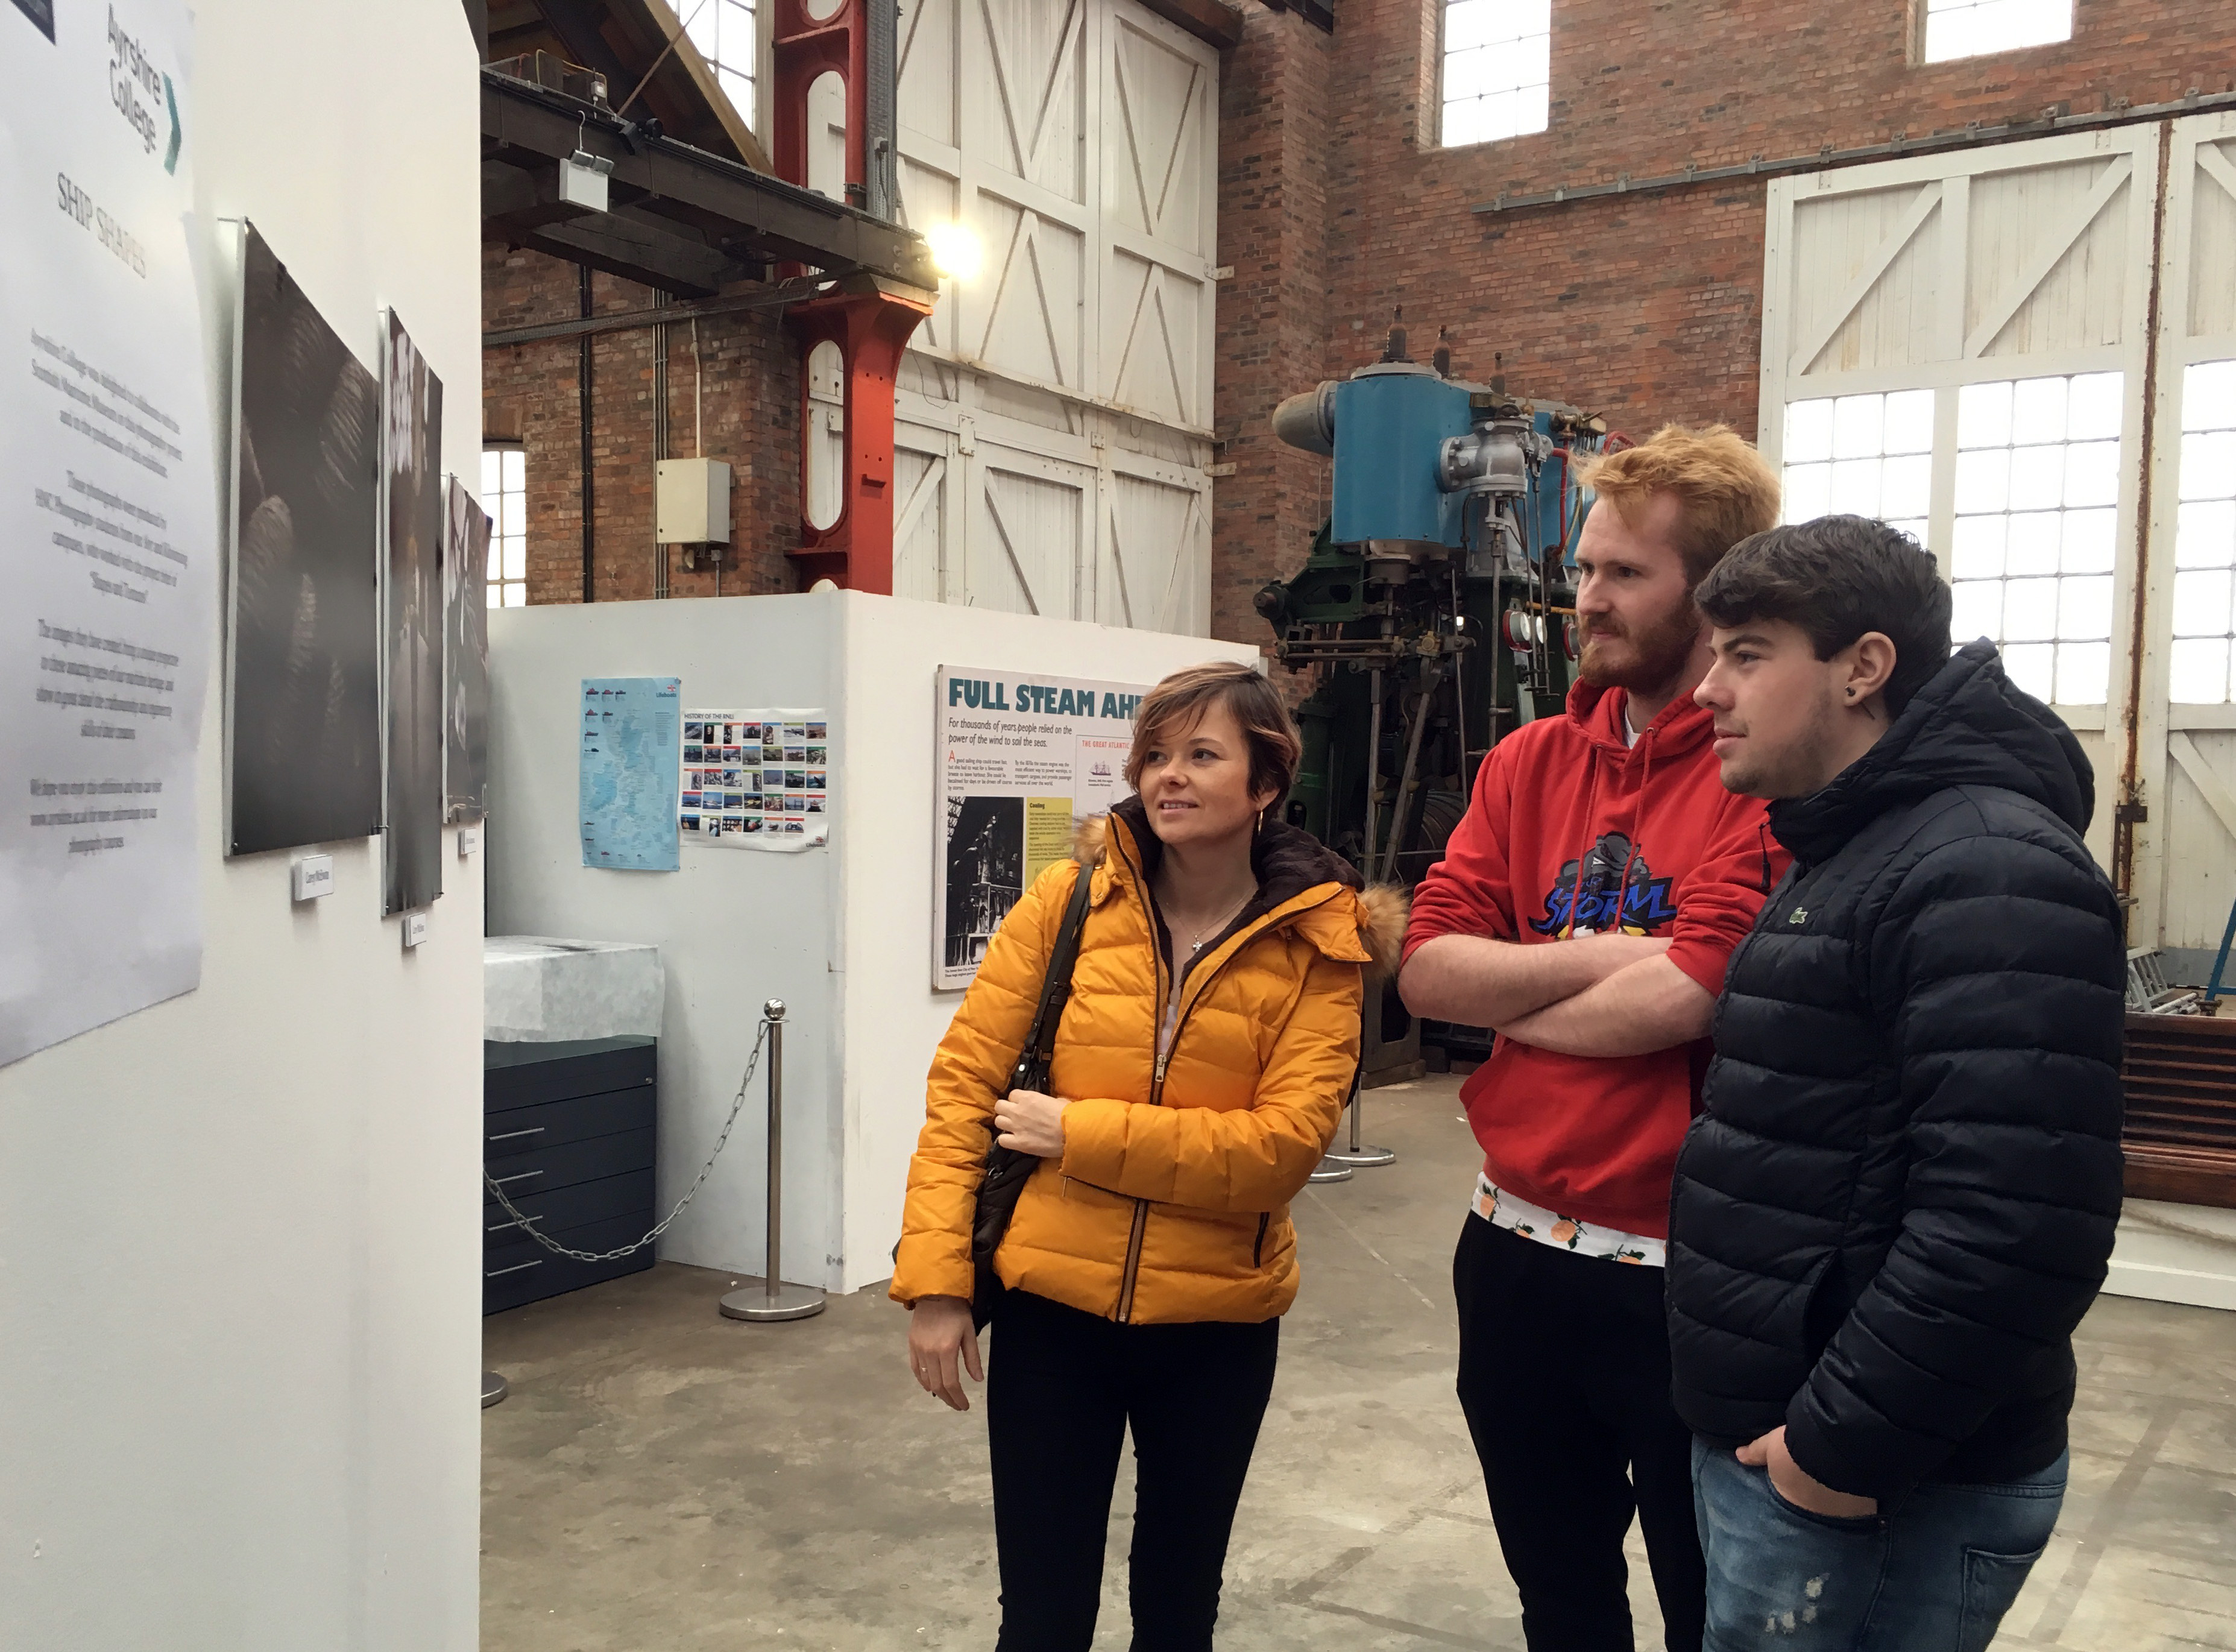 Photography students get great exposure at Scottish Maritime Museum